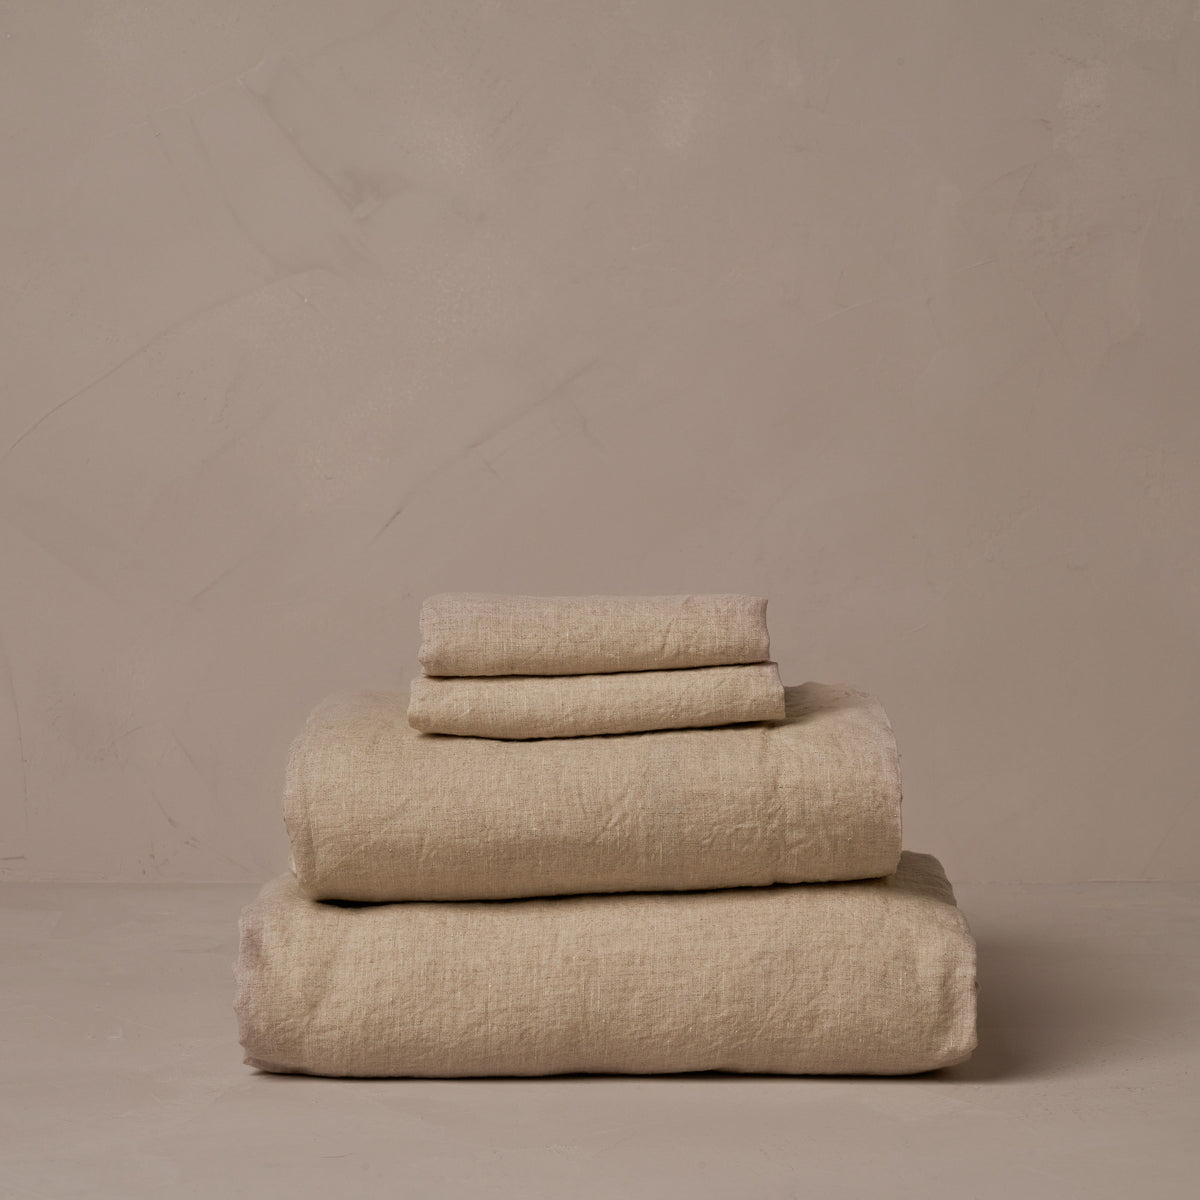 A stack of relaxed and breathable natural colored Classic Linen sheets. Belgian flax, made in Italy. The set includes a fitted sheet, a flat sheet, and a pair of pillowcases. data-image-id=